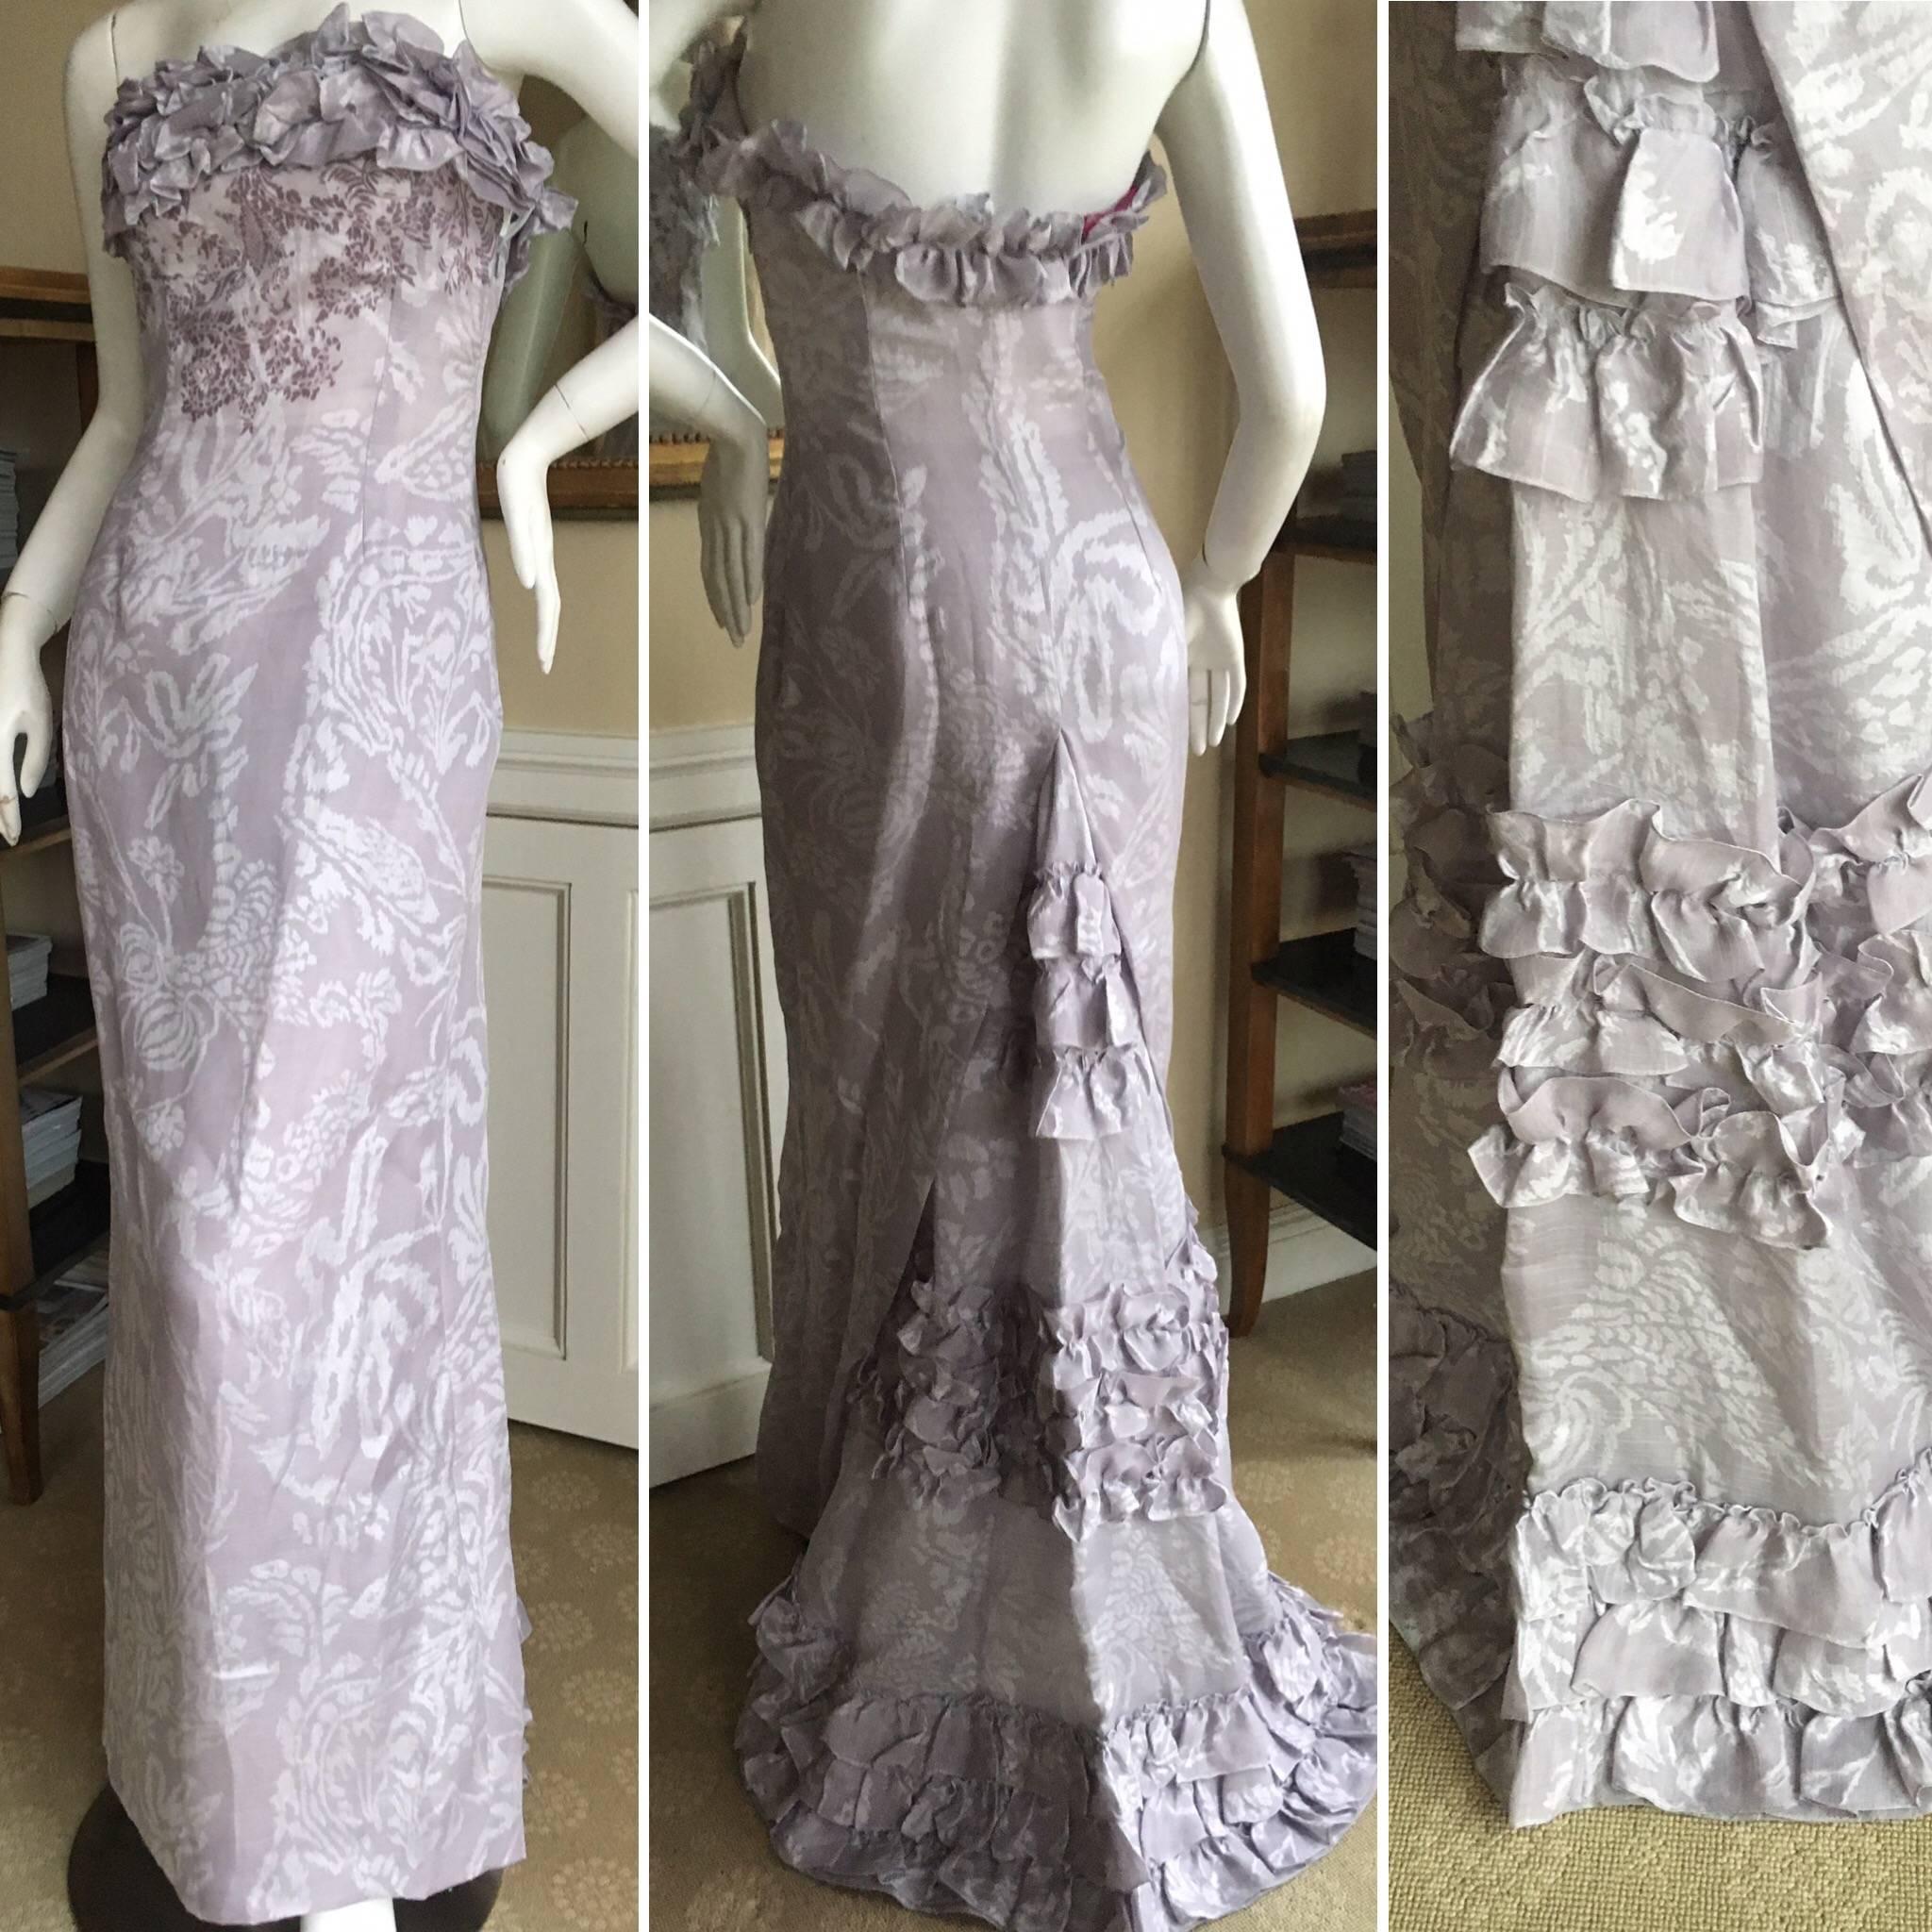 Christian Lacroix  Ruffled Gray Silk Jacquard Strapless Evening Dress with Train.
This is so exquisite, the photos don't capture it's charm.
Size 38
Bust 36"
Waist 27"
Hips 48"
Length 52"
Excellent condition